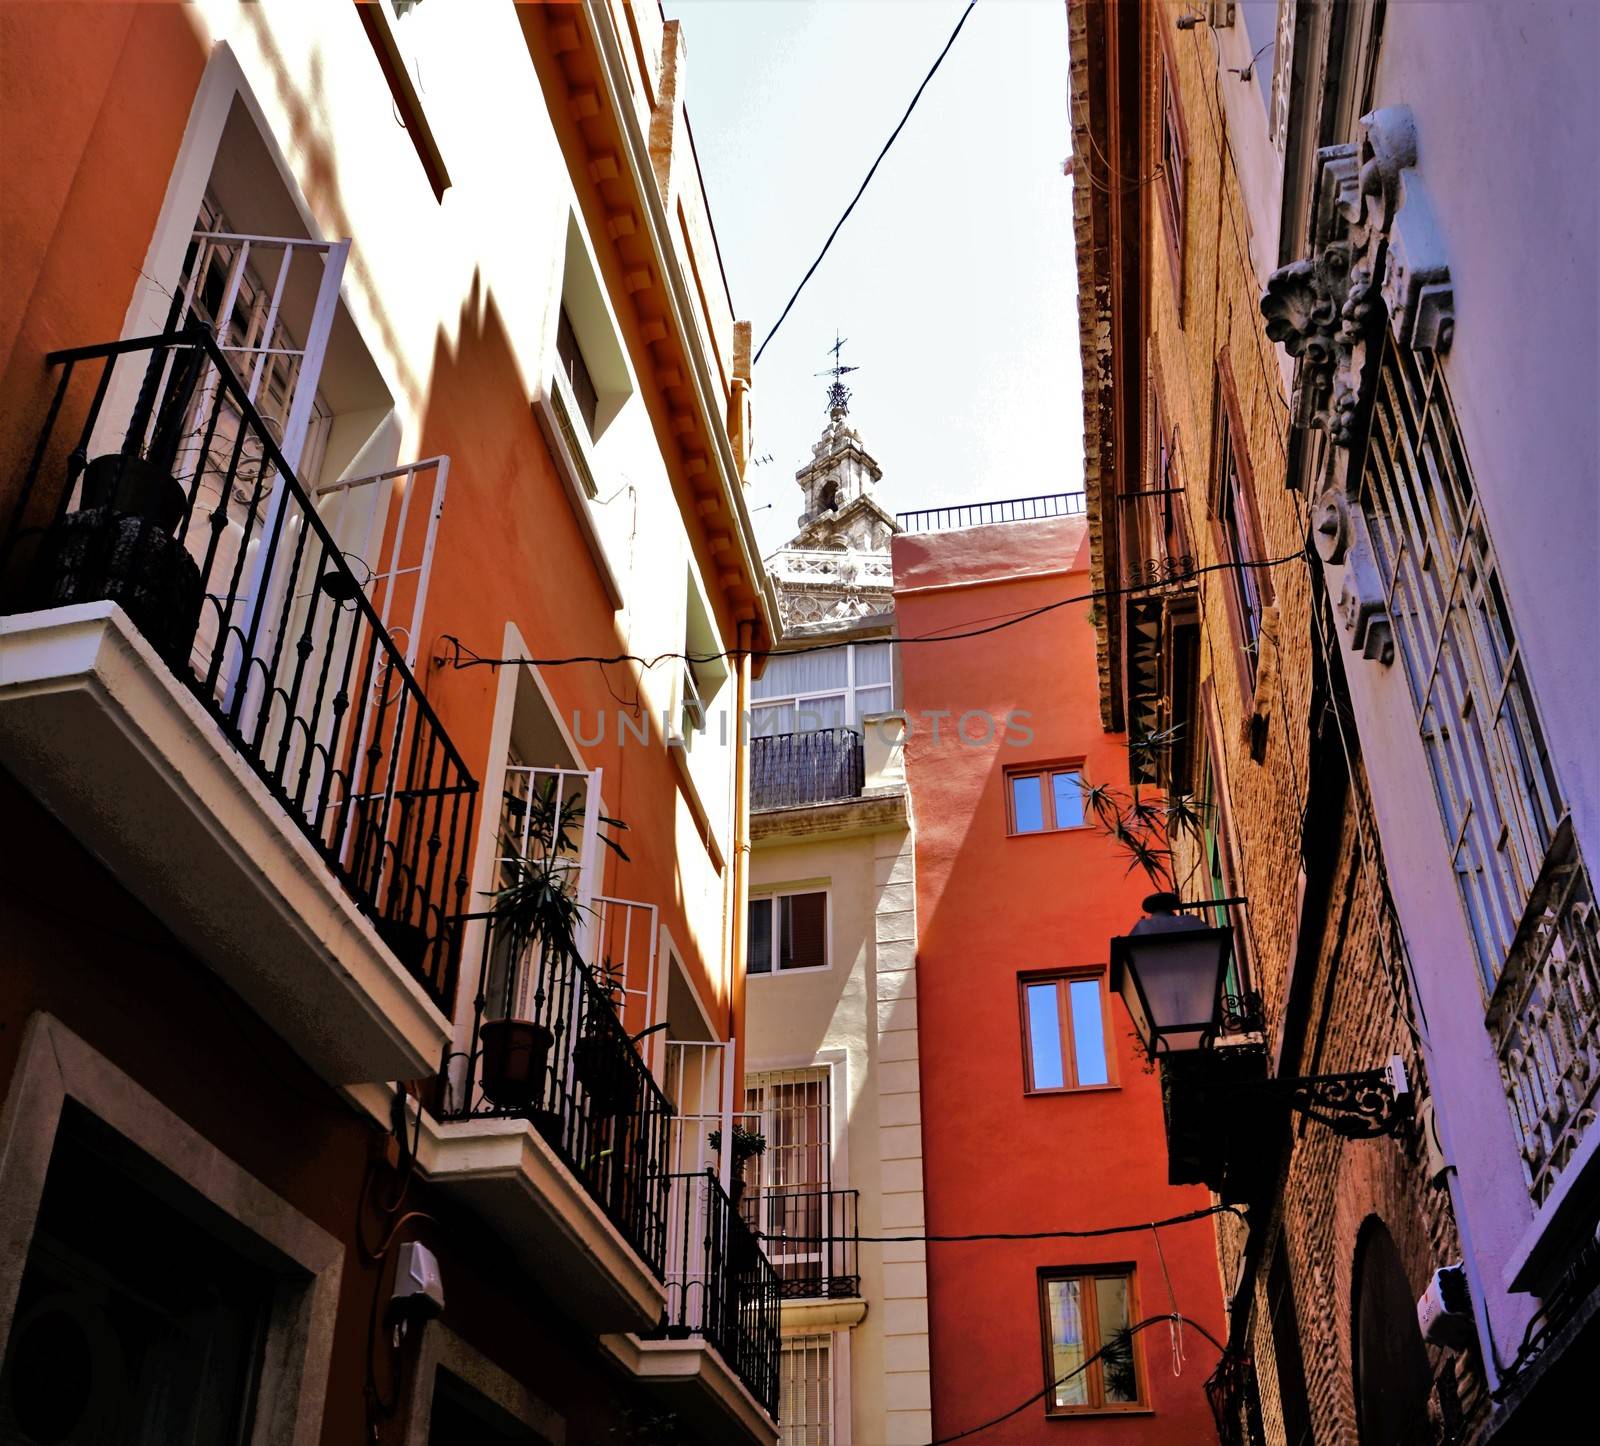 Tranquil street in the city center of Valencia by pisces2386